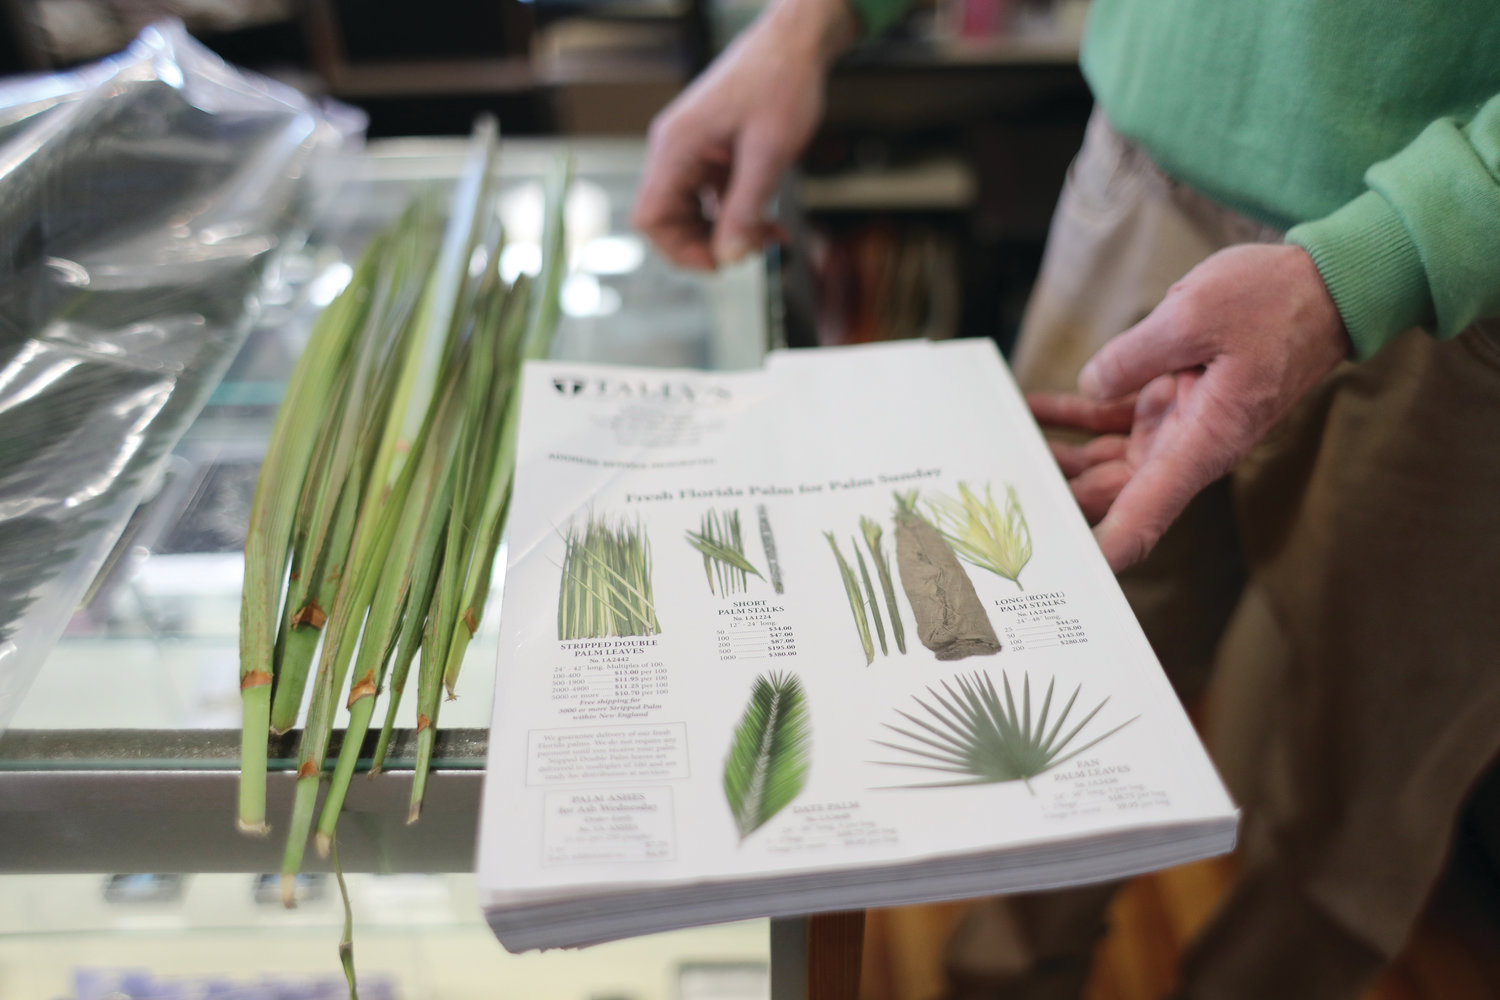 PJ Tally displays a catalog showcasing a variety of palms available to order for Palm Sunday celebrations in parish communities locally and throughout New England.